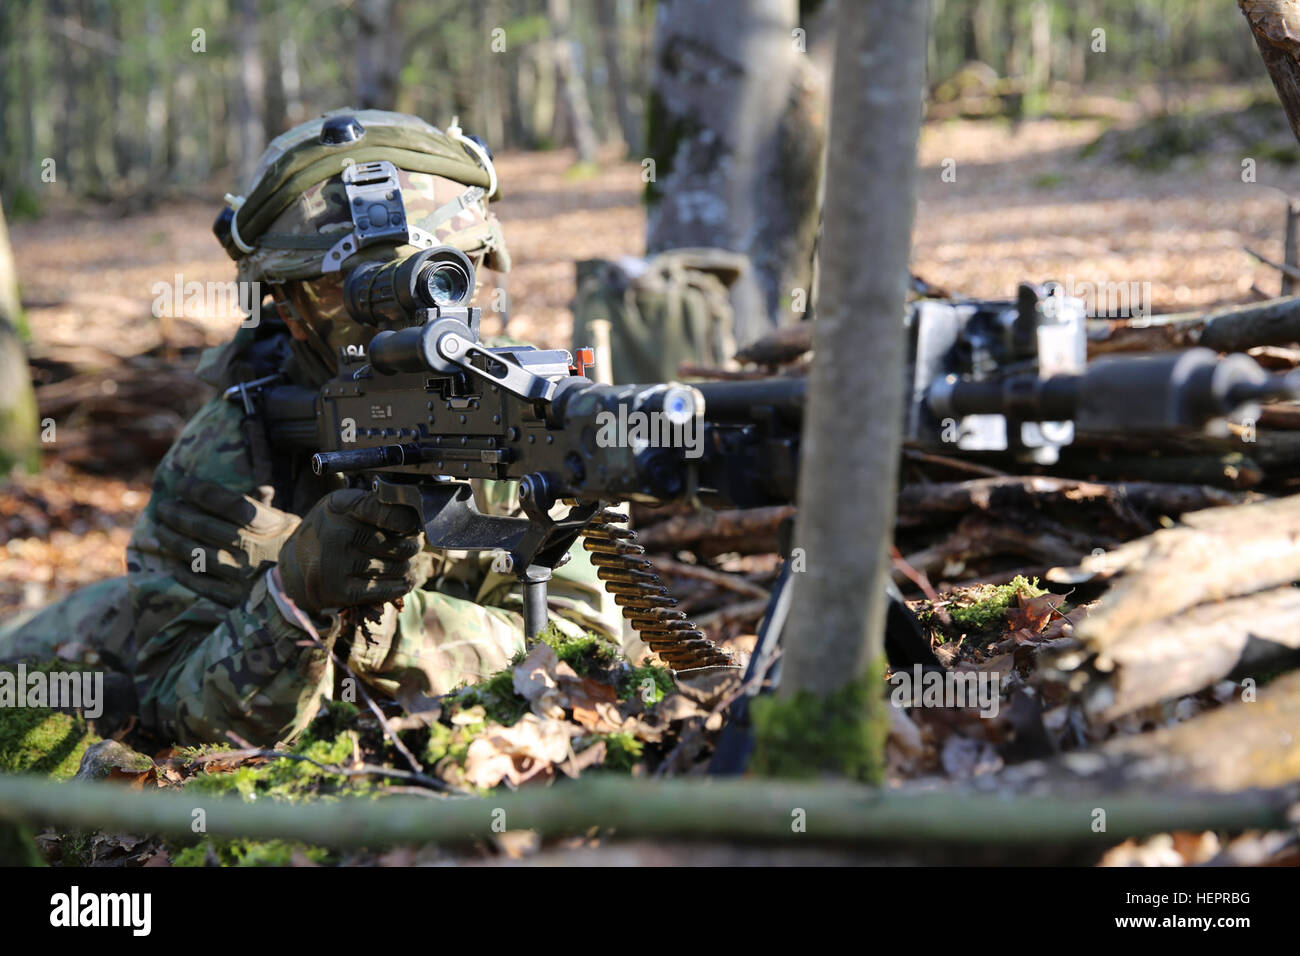 U.S. Army Pfc. Jonathan Beemer of 1st Battalion, 503rd Airborne Infantry Regiment, 173rd Airborne Brigade sets perimeter security while conducting defensive operations during exercise Saber Junction 16 at the U.S. Army’s Joint Multinational Readiness Center (JMRC) in Hohenfels, Germany, April 19, 2016. Saber Junction 16 is the U.S. Army Europe’s 173rd Airborne Brigade’s combat training center certification exercise, taking place at the JMRC in Hohenfels, Germany, Mar. 31-Apr. 24, 2016.  The exercise is designed to evaluate the readiness of the Army’s Europe-based combat brigades to conduct uni Stock Photo